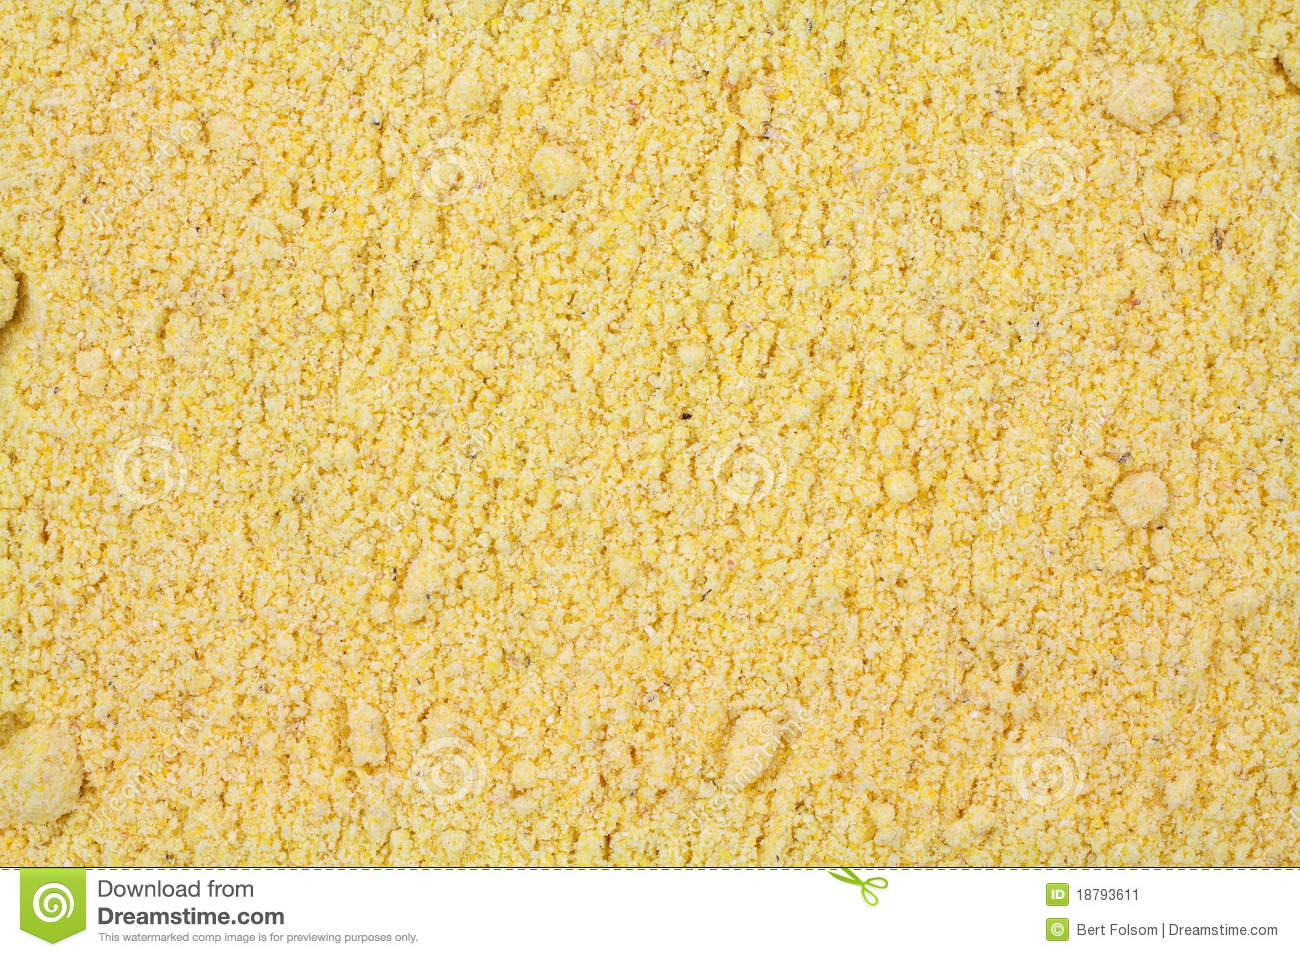 Layer Of Stone Ground Yellow Corn Meal Stock Image   Image  18793611